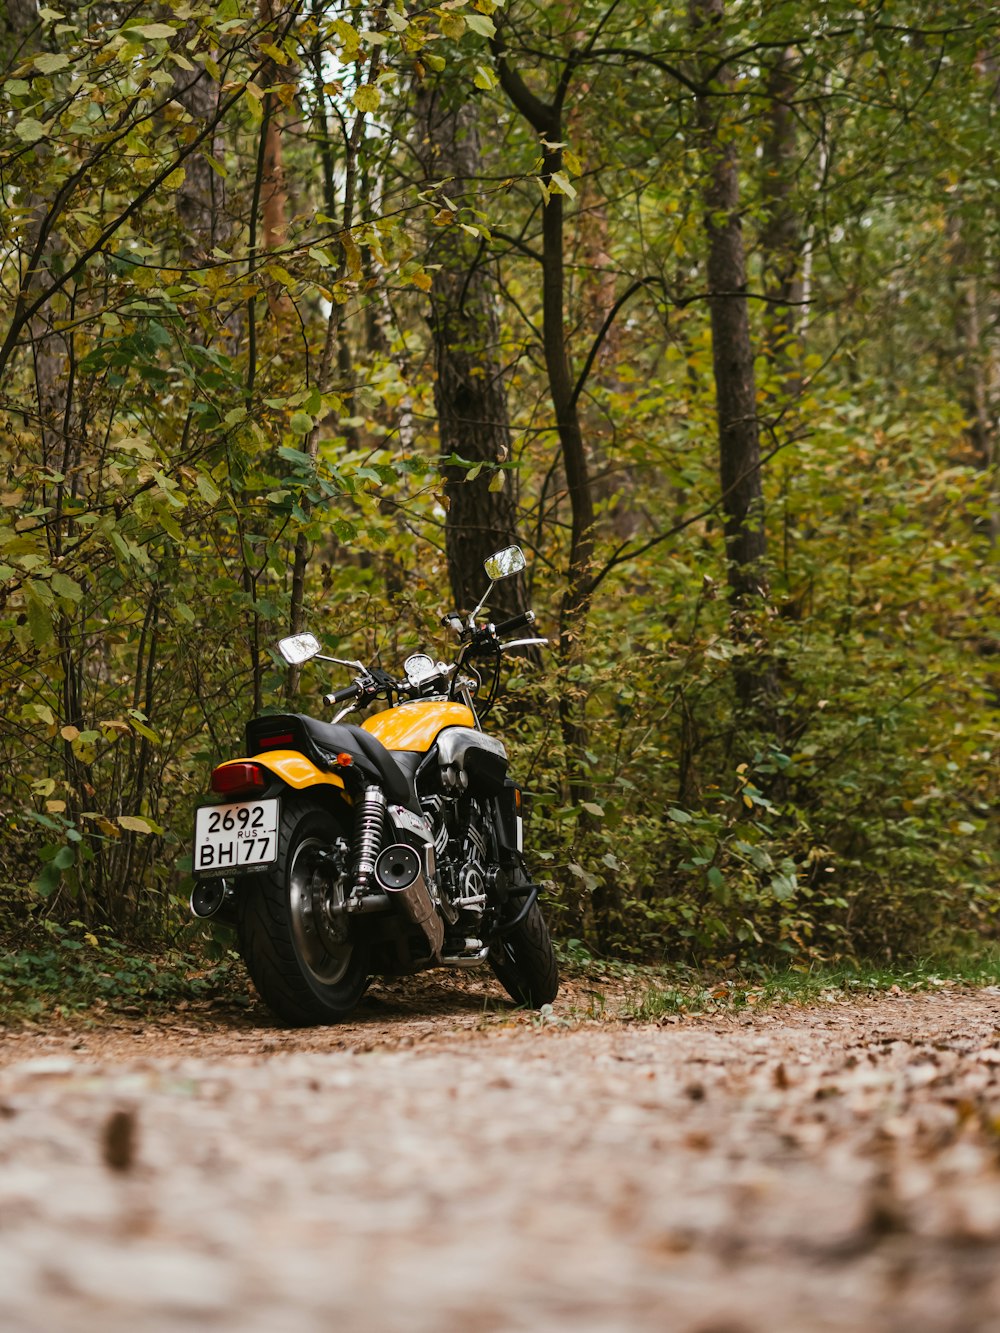 yellow and black motorcycle parked beside tall green trees